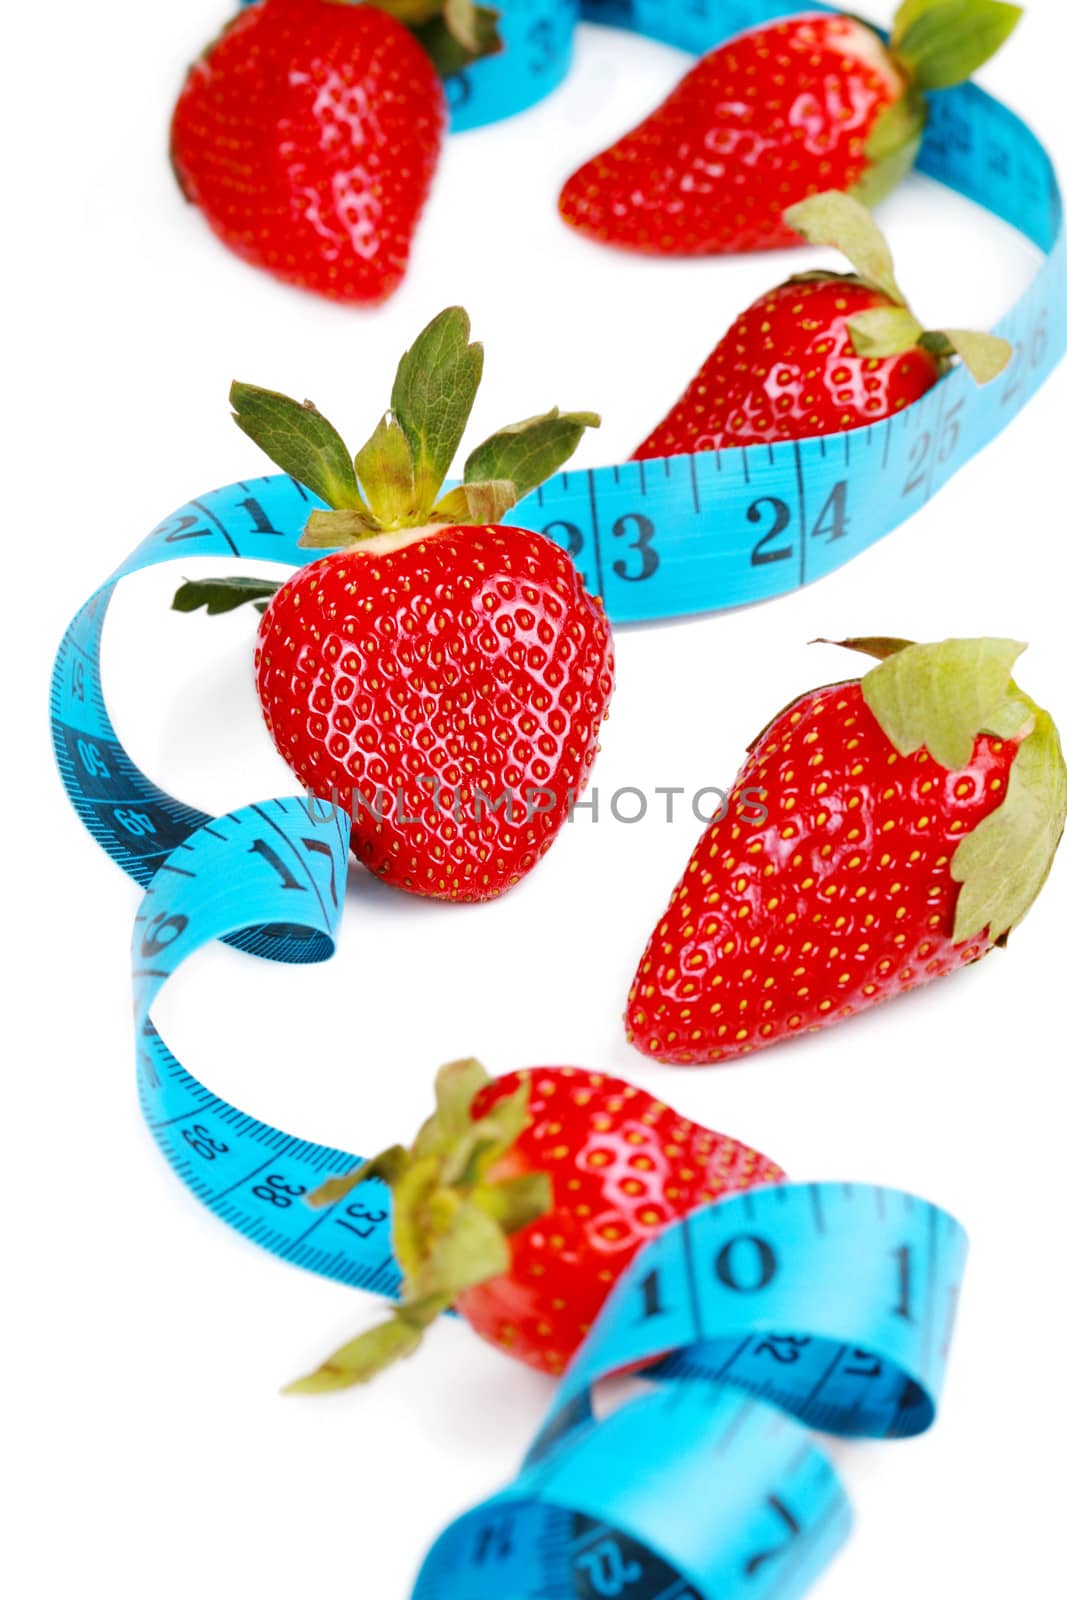 Berries with tape measure. Health concept. by jarenwicklund